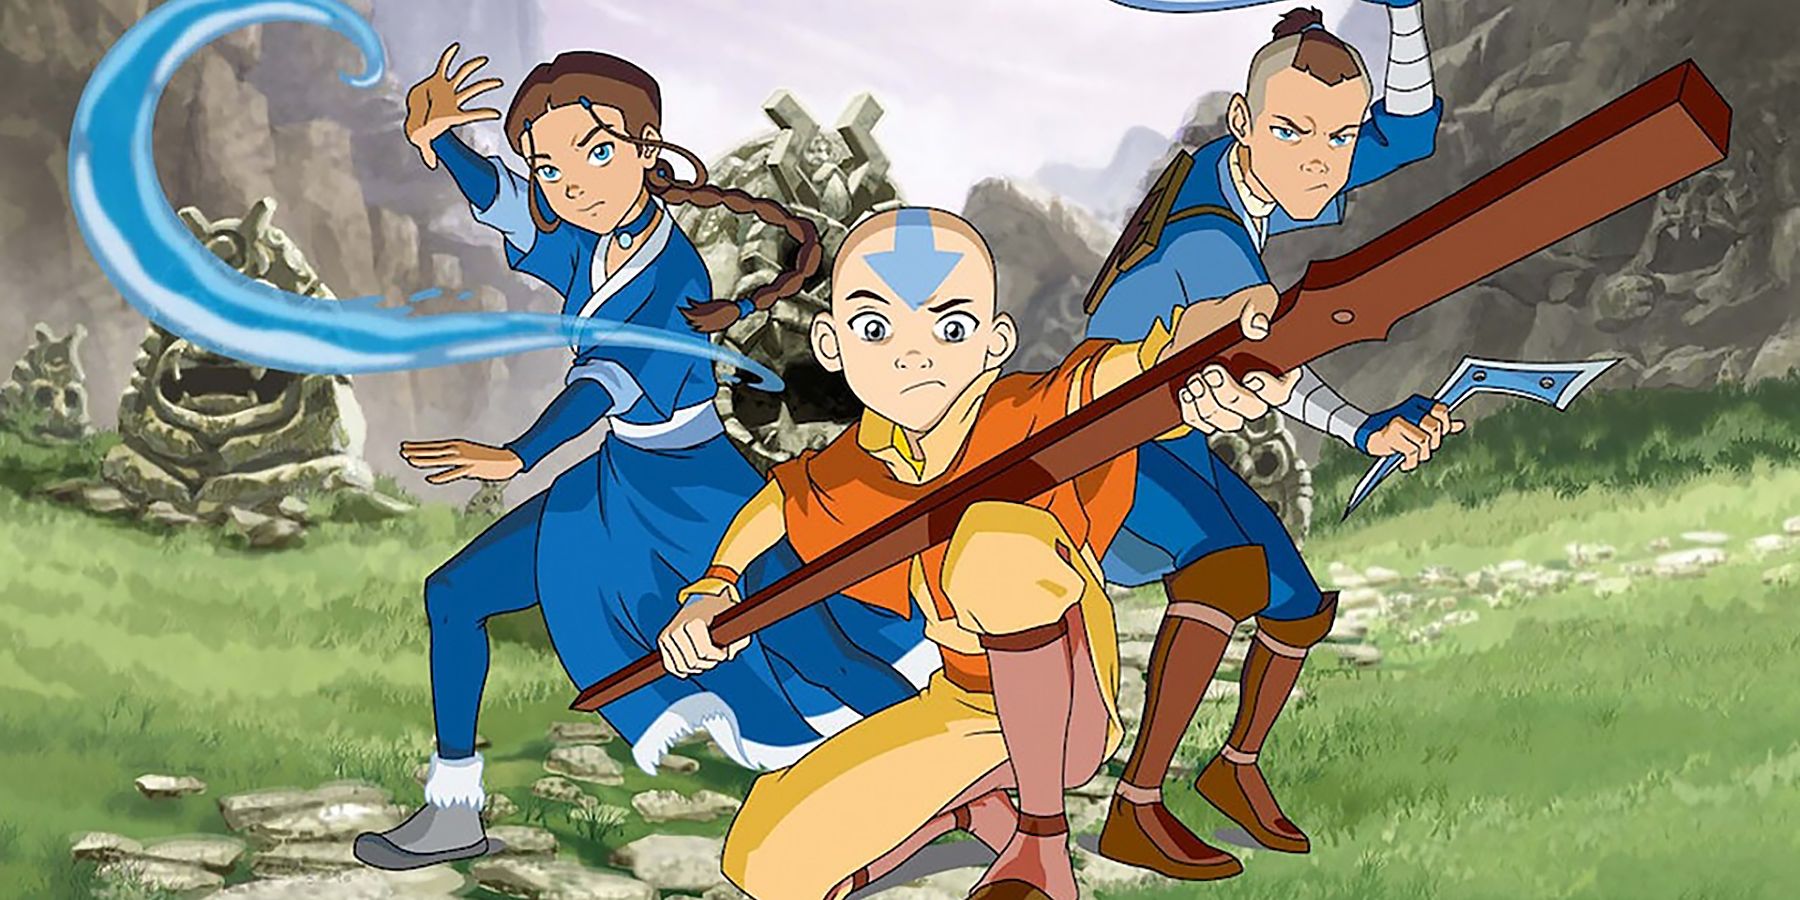 Avatar: The Last Airbender. 2005-2008. Nickelodeon. Ang and co.